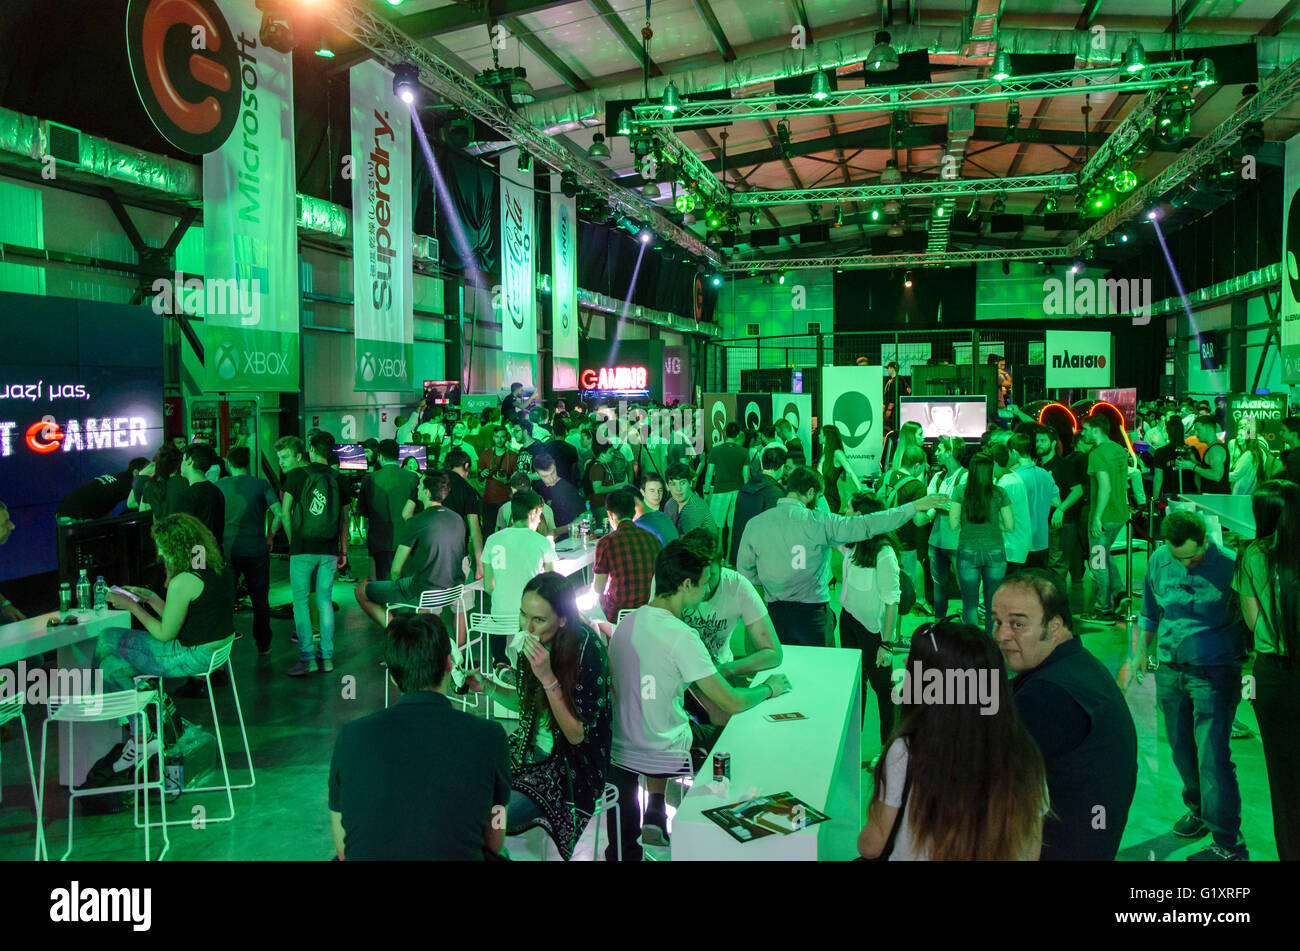 Athens, Greece. 19th May, 2016. The greatest Gaming event ever took place  yesterday in Athens Greece, with Gaming Tournaments, many presents, VIPs,  Guest DJs, and famous Greek YouTubers, with over 70 gaming